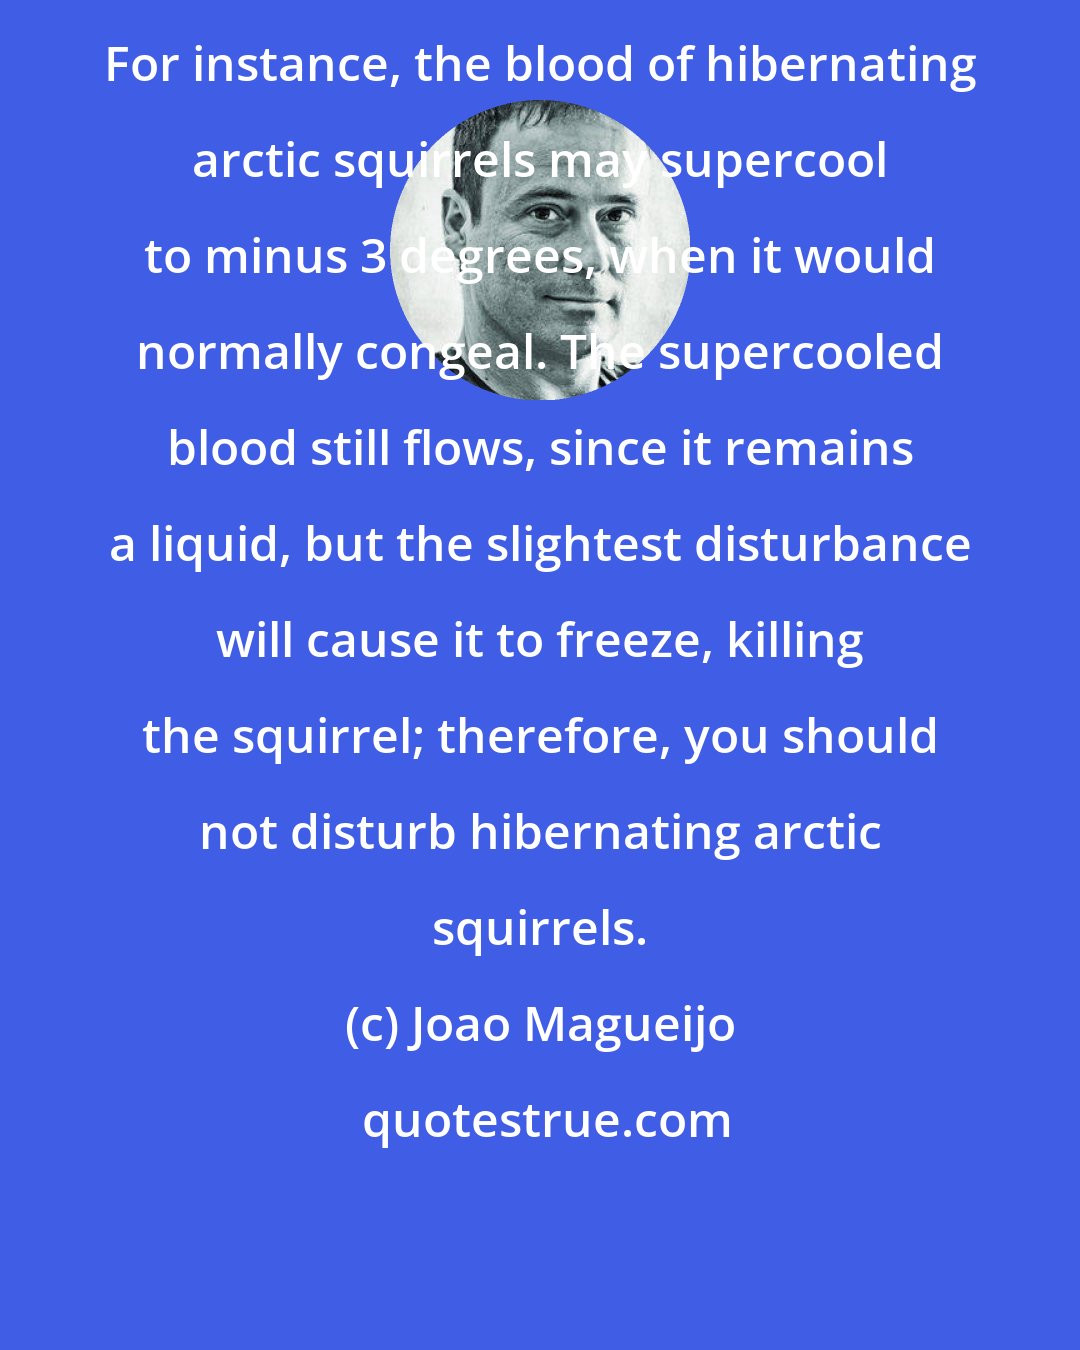 Joao Magueijo: For instance, the blood of hibernating arctic squirrels may supercool to minus 3 degrees, when it would normally congeal. The supercooled blood still flows, since it remains a liquid, but the slightest disturbance will cause it to freeze, killing the squirrel; therefore, you should not disturb hibernating arctic squirrels.